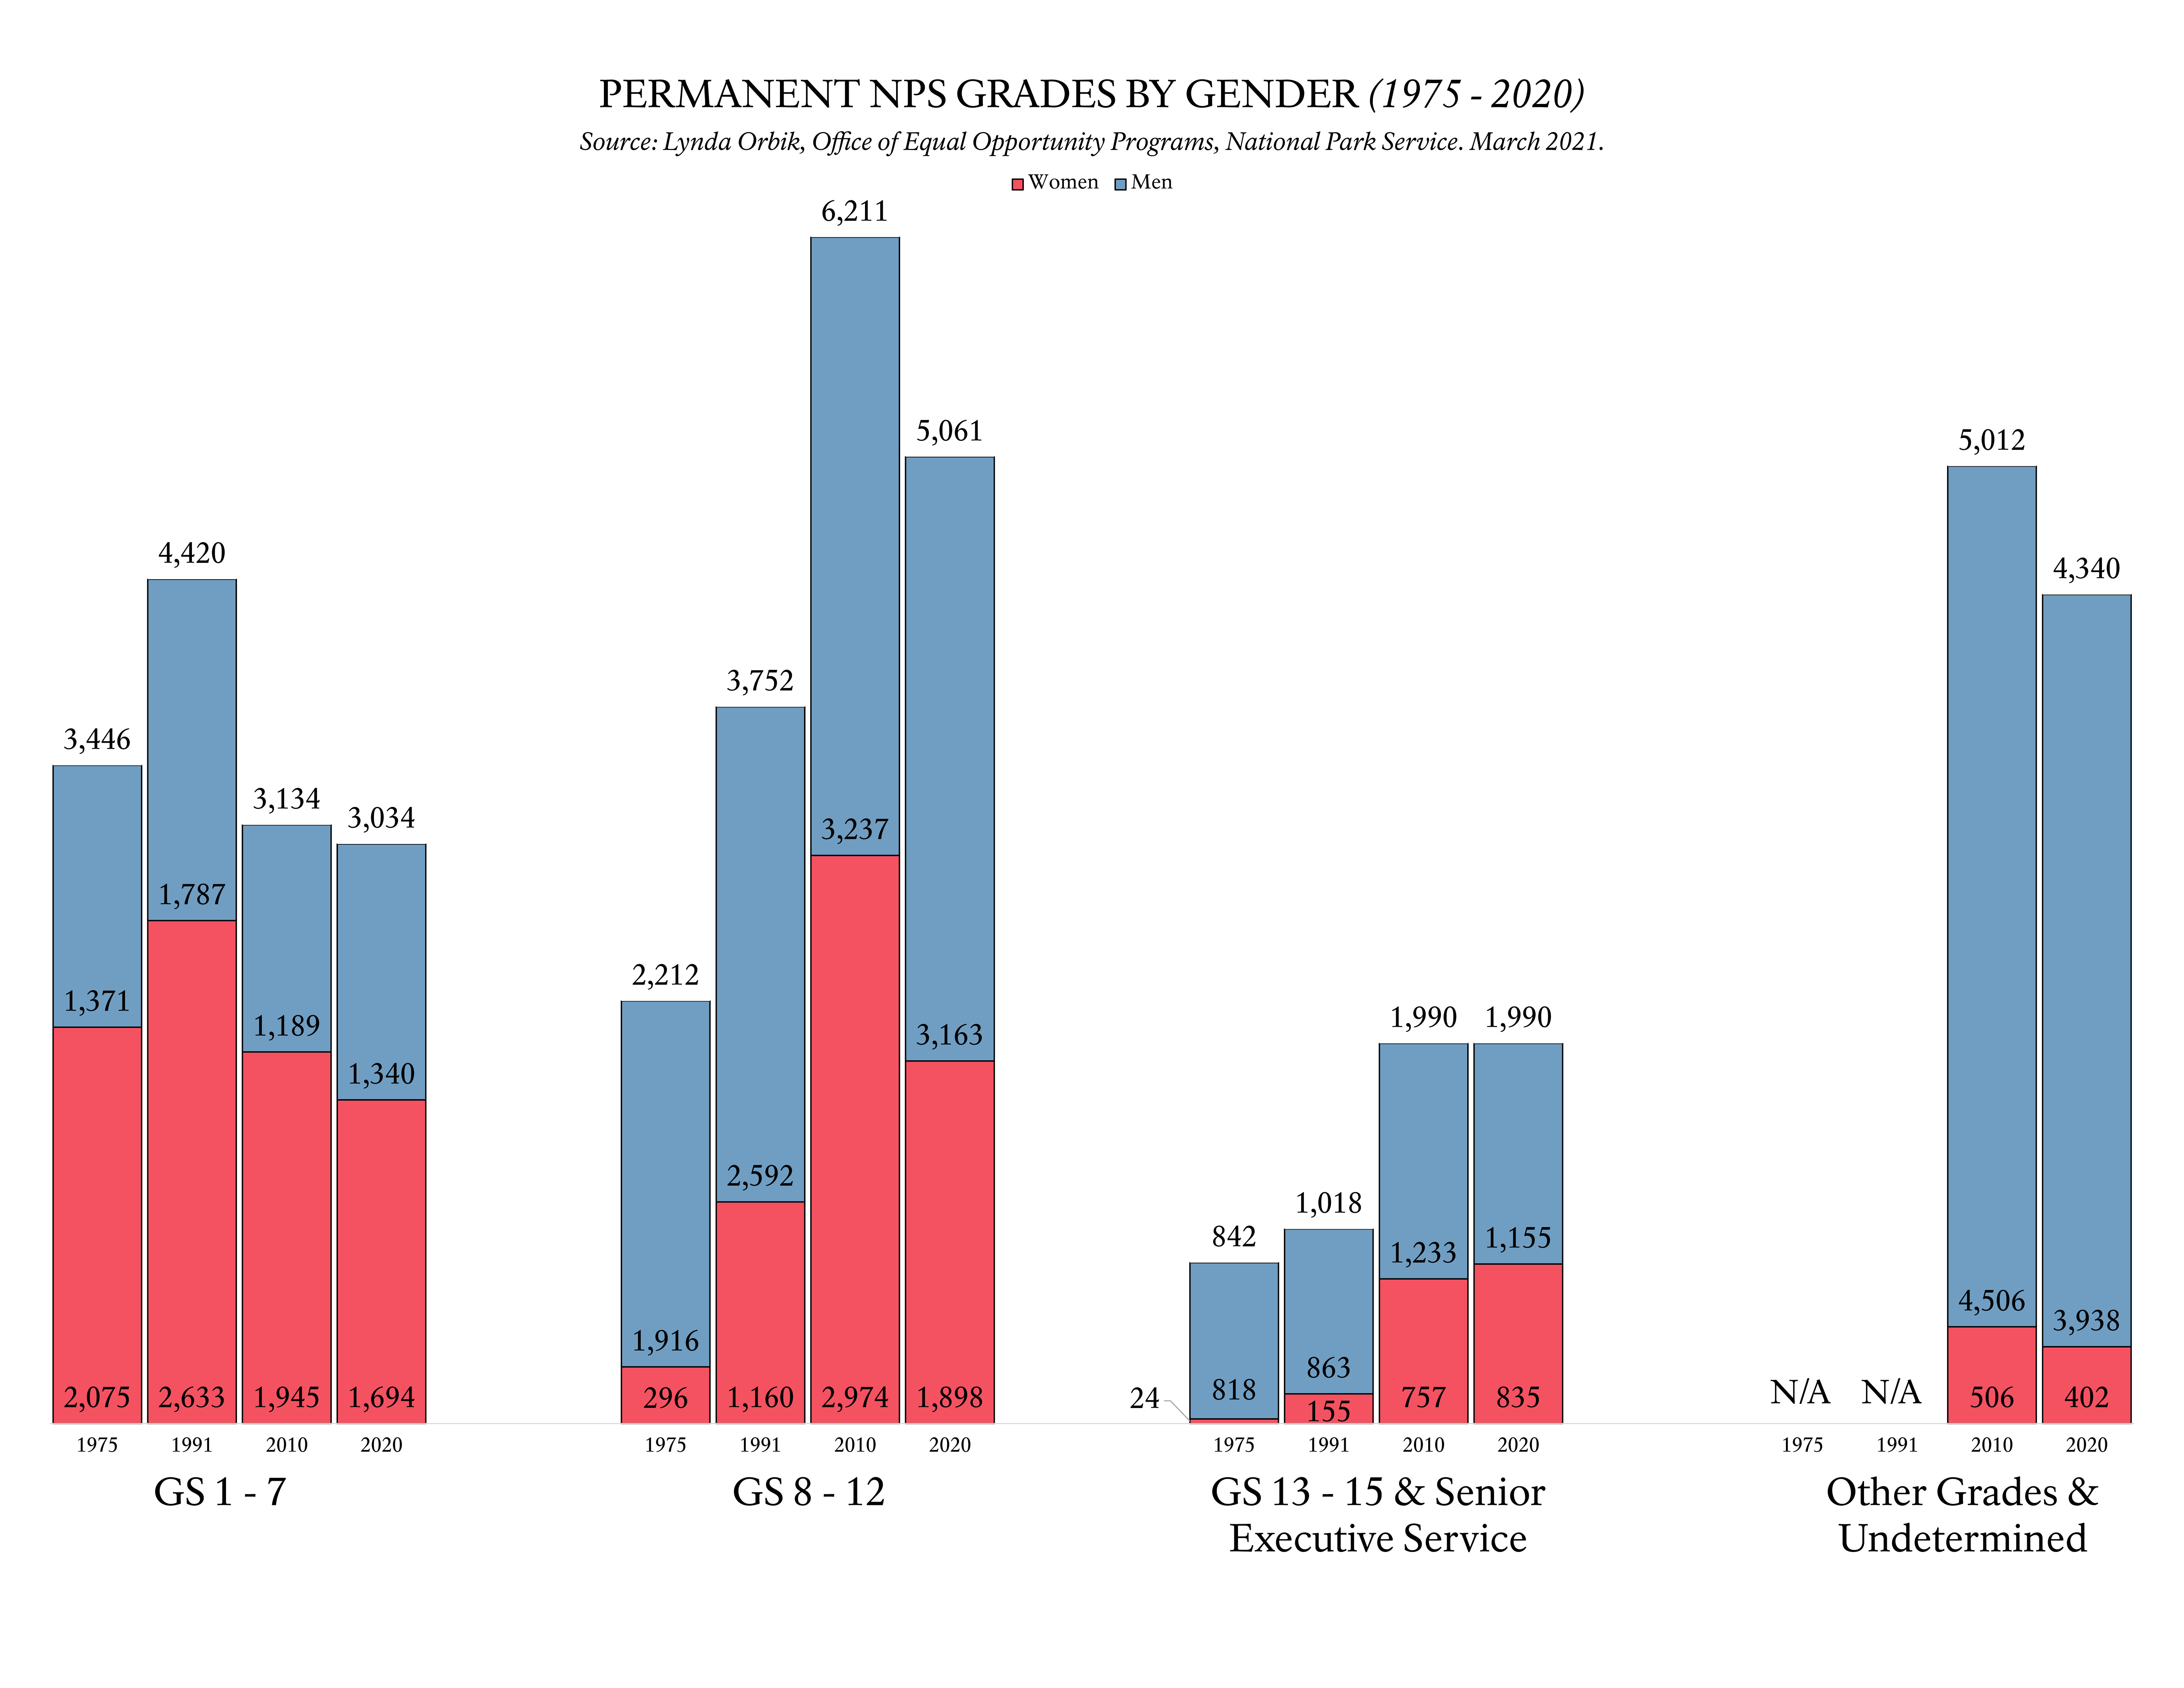 Bar chart representing the grade levels of jobs held by NPS men and women with permanent positions (1975-2020).